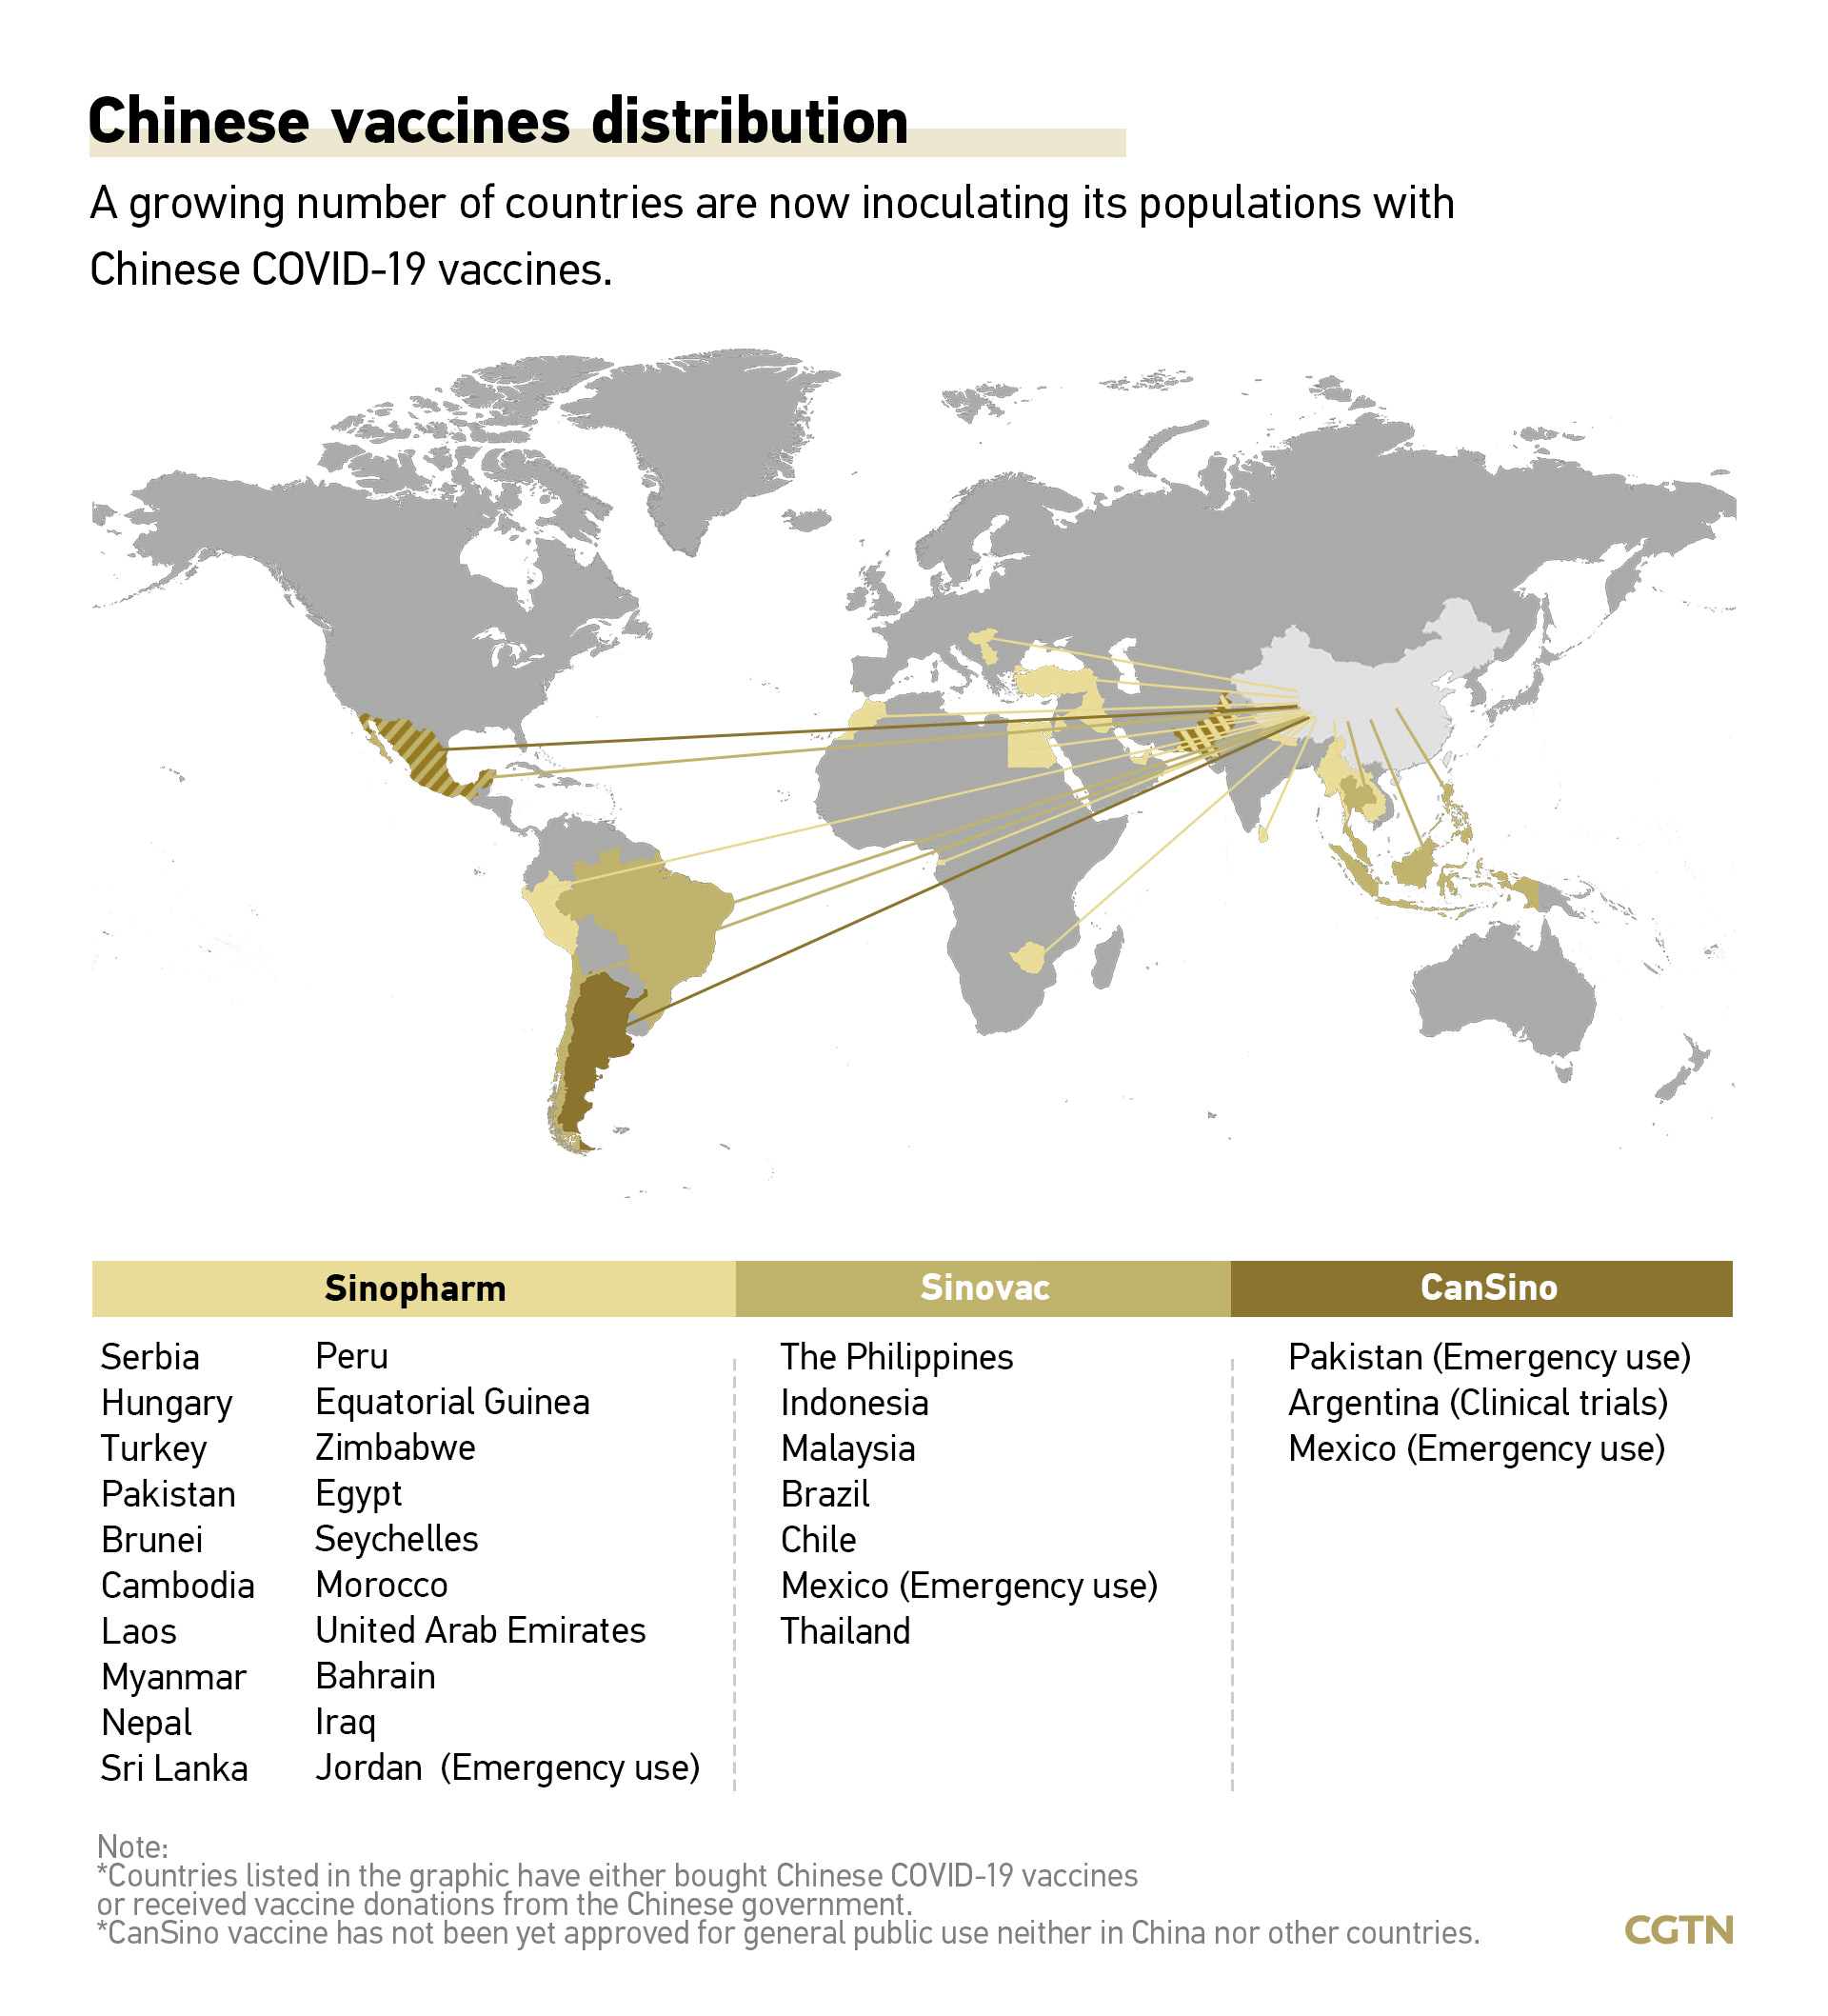 Sinopharm vaccine made in which country